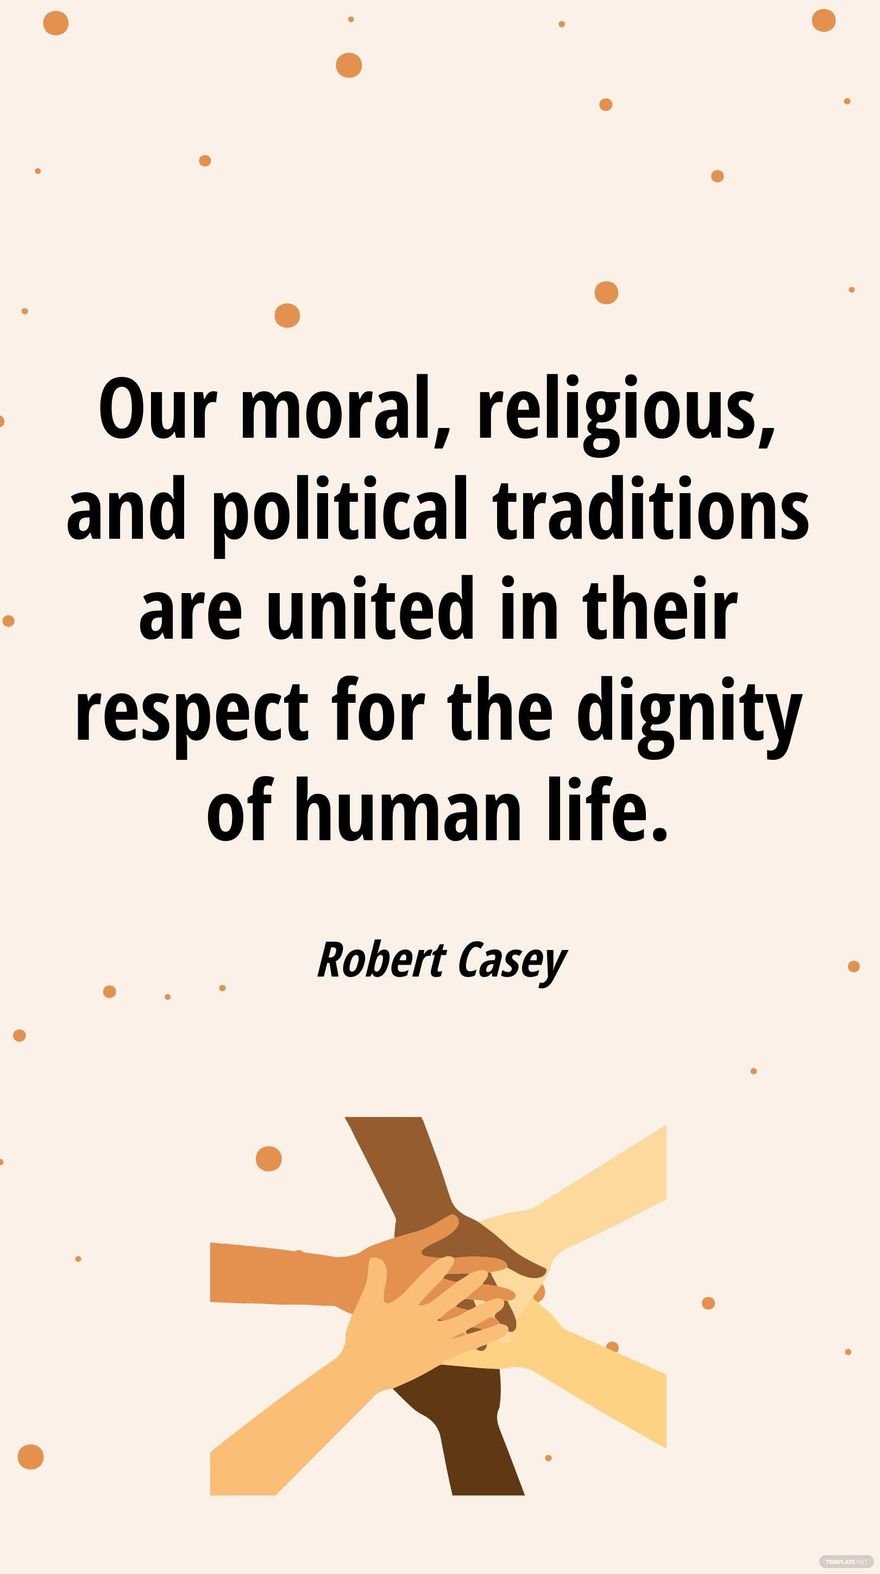 Free Robert Casey - Our moral, religious, and political traditions are united in their respect for the dignity of human life. in JPG